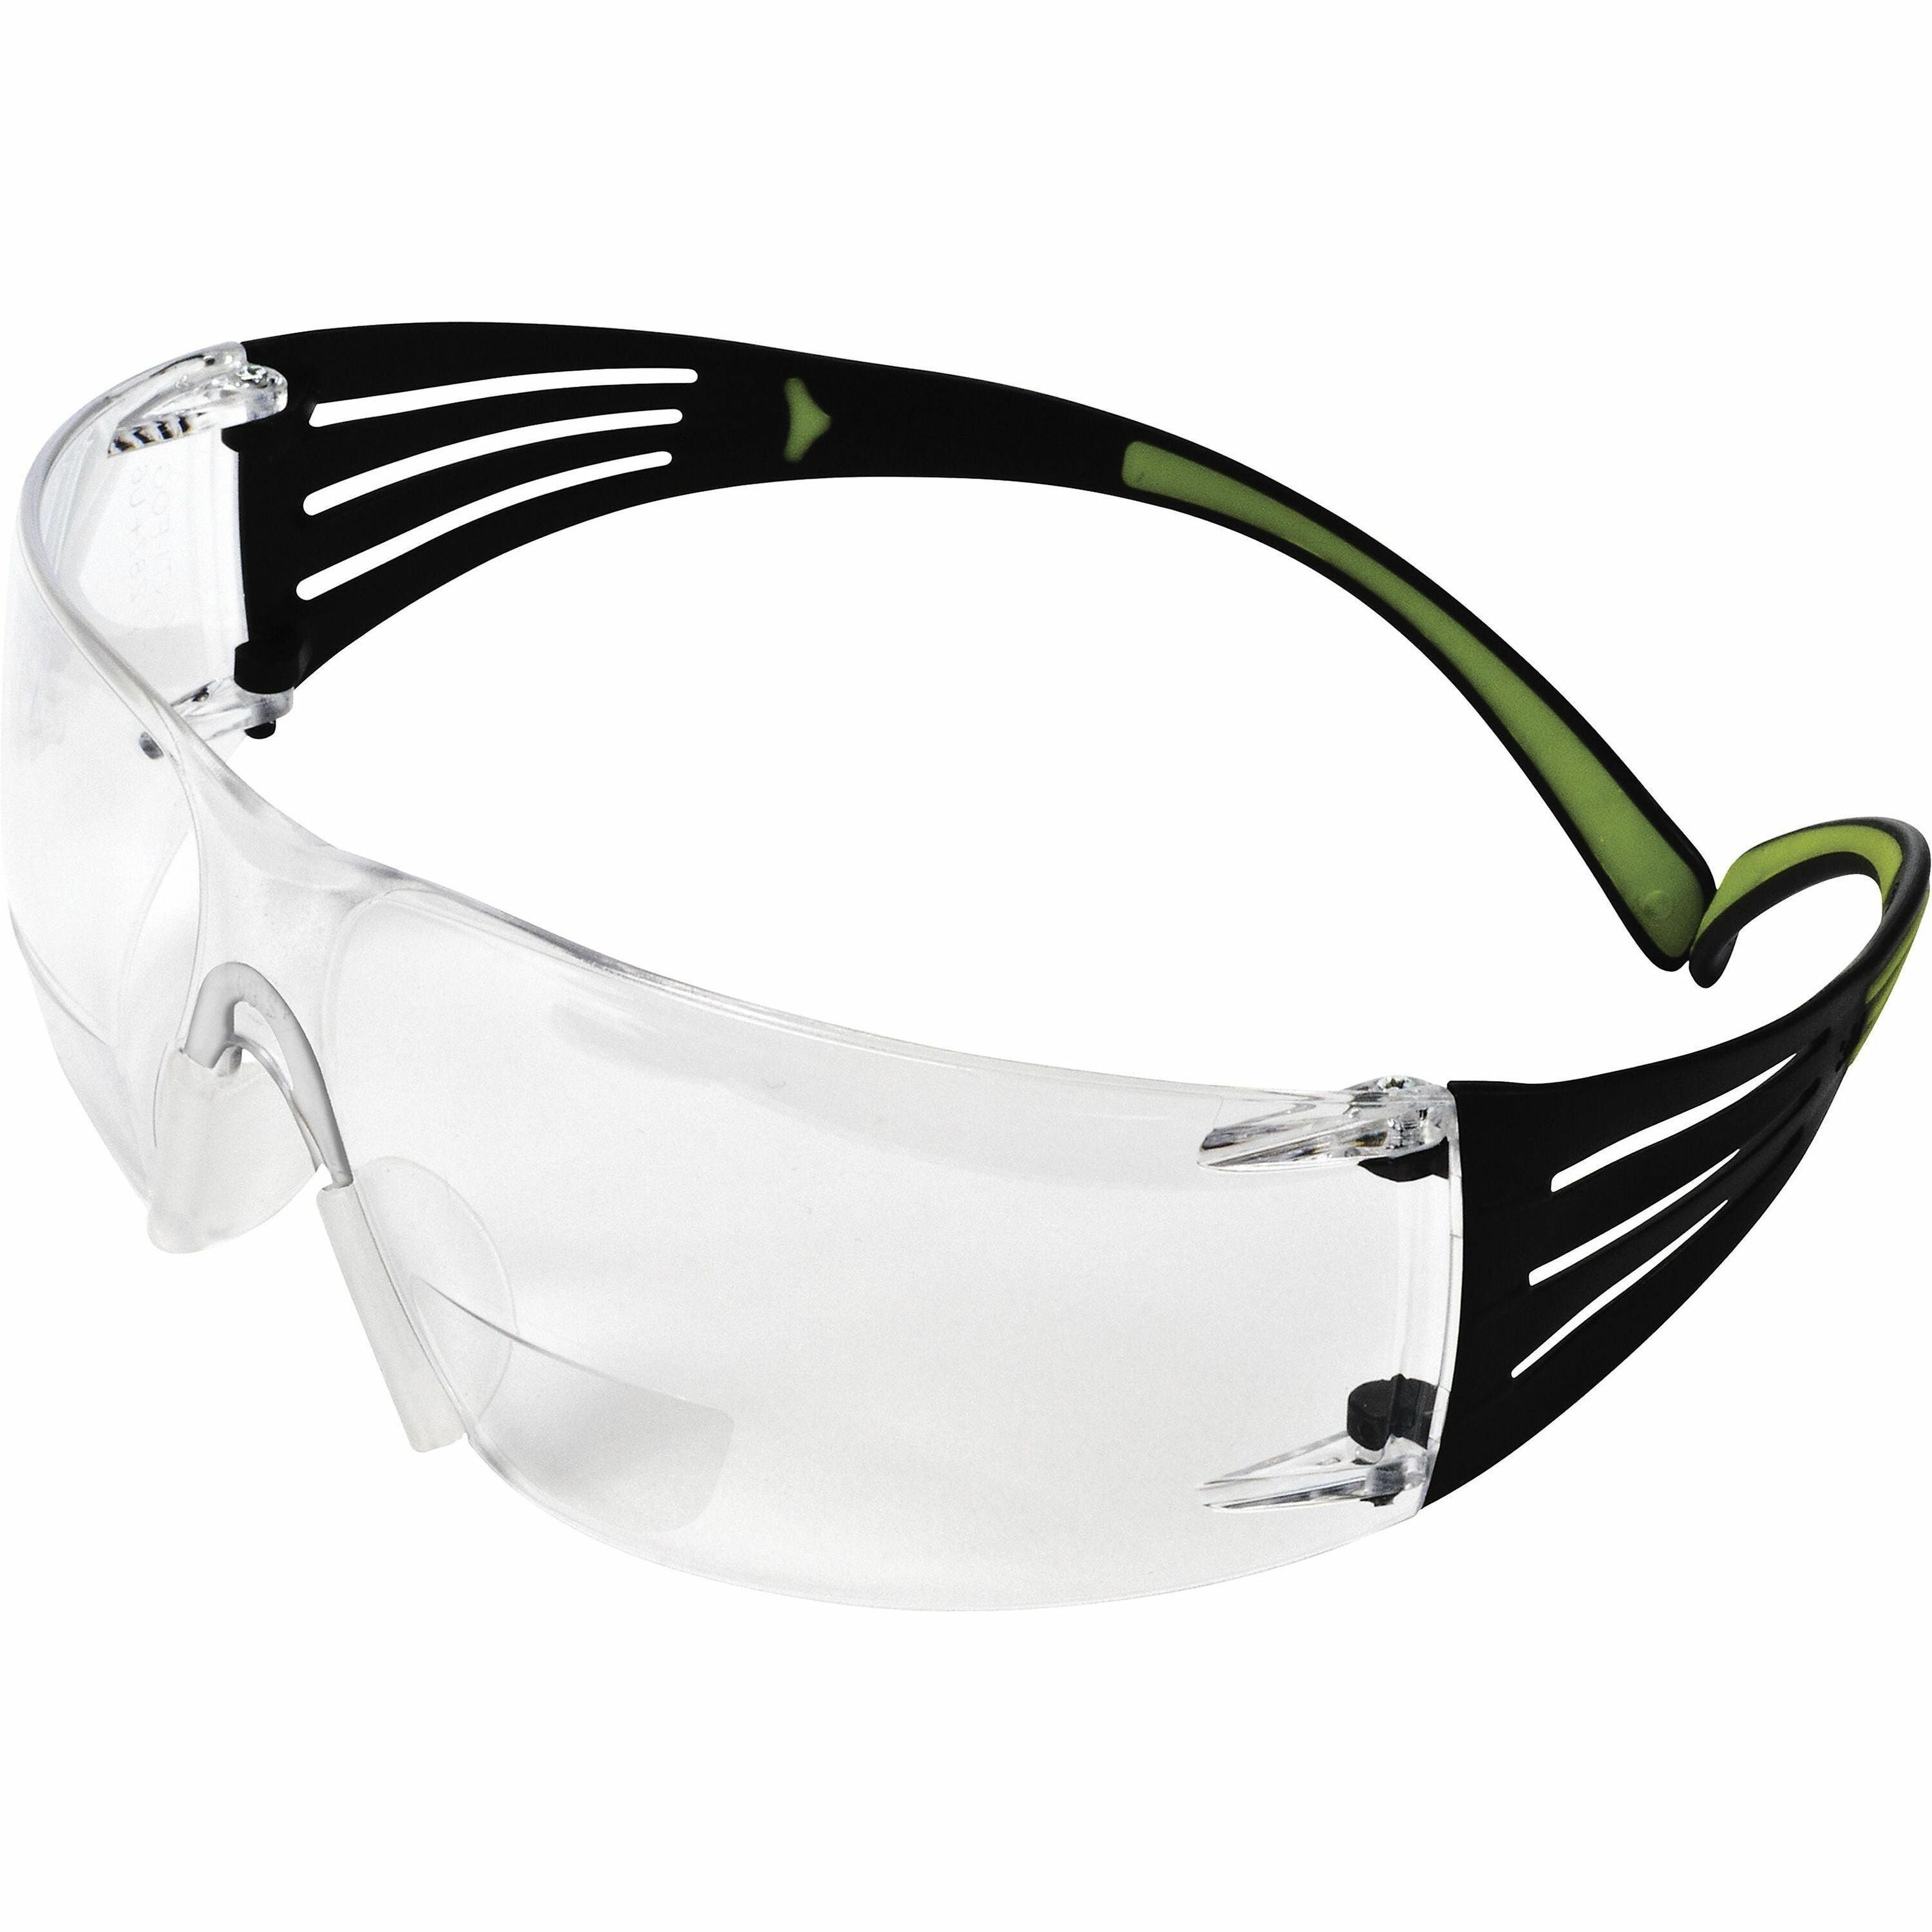 3m-securefit-protective-eyewear-recommended-for-workplace-assembly-cleaning-demolition-drilling-electrical-facility-maintenance-grinding-machine-operation-metal-machining-masonry--fog-uva-uvb-uvc-ultraviolet-protection-polyca_mmmsf420af - 1